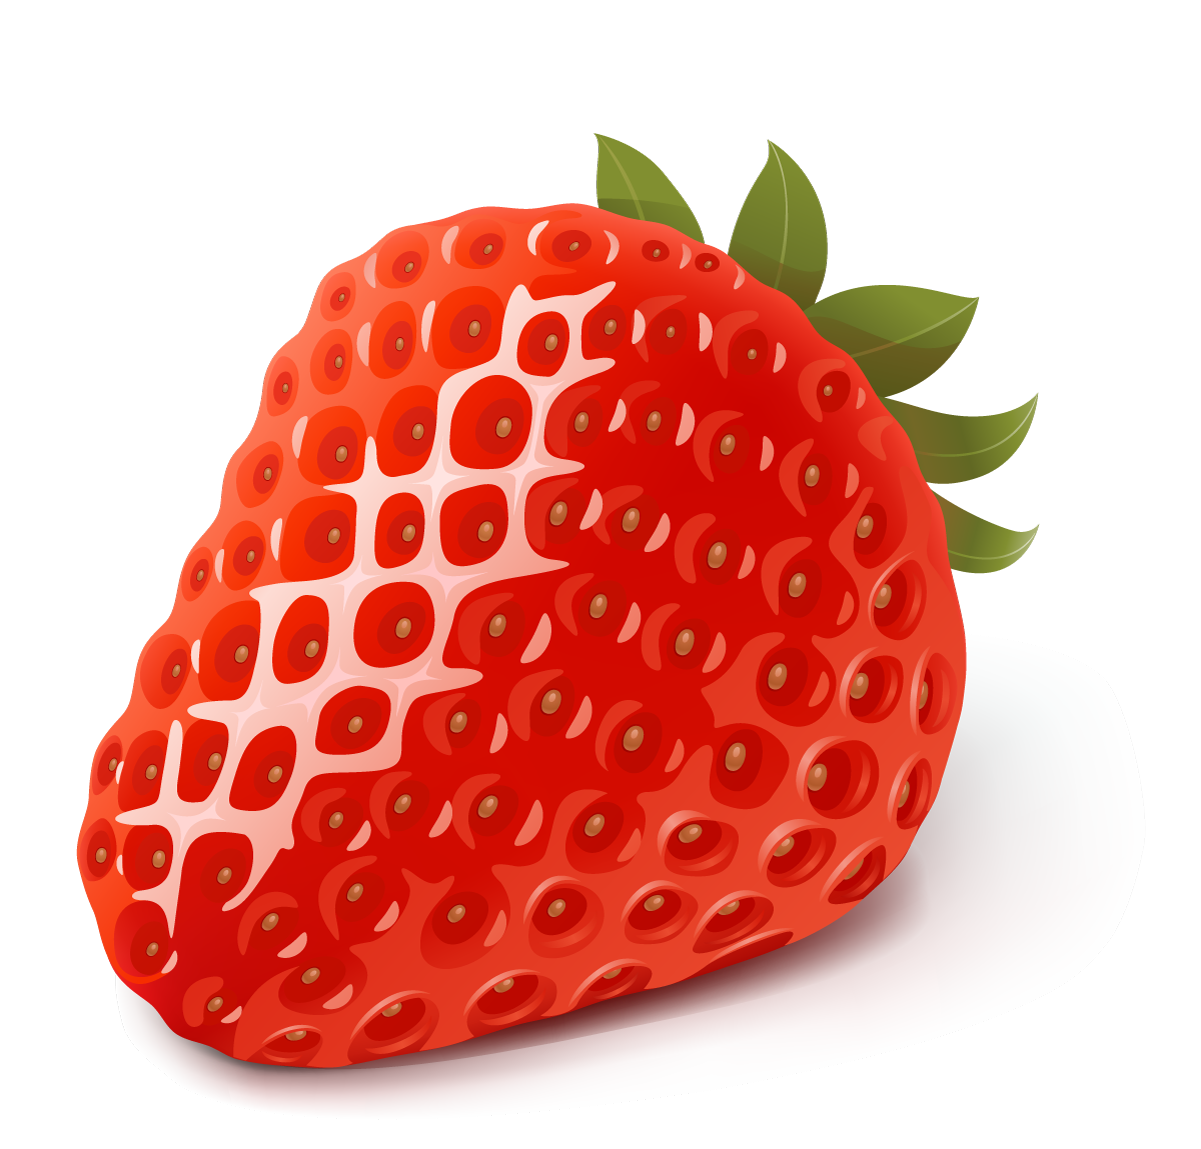 Strawberry Fruit PNG Transparent Background, Free Download #22926 -  FreeIconsPNG